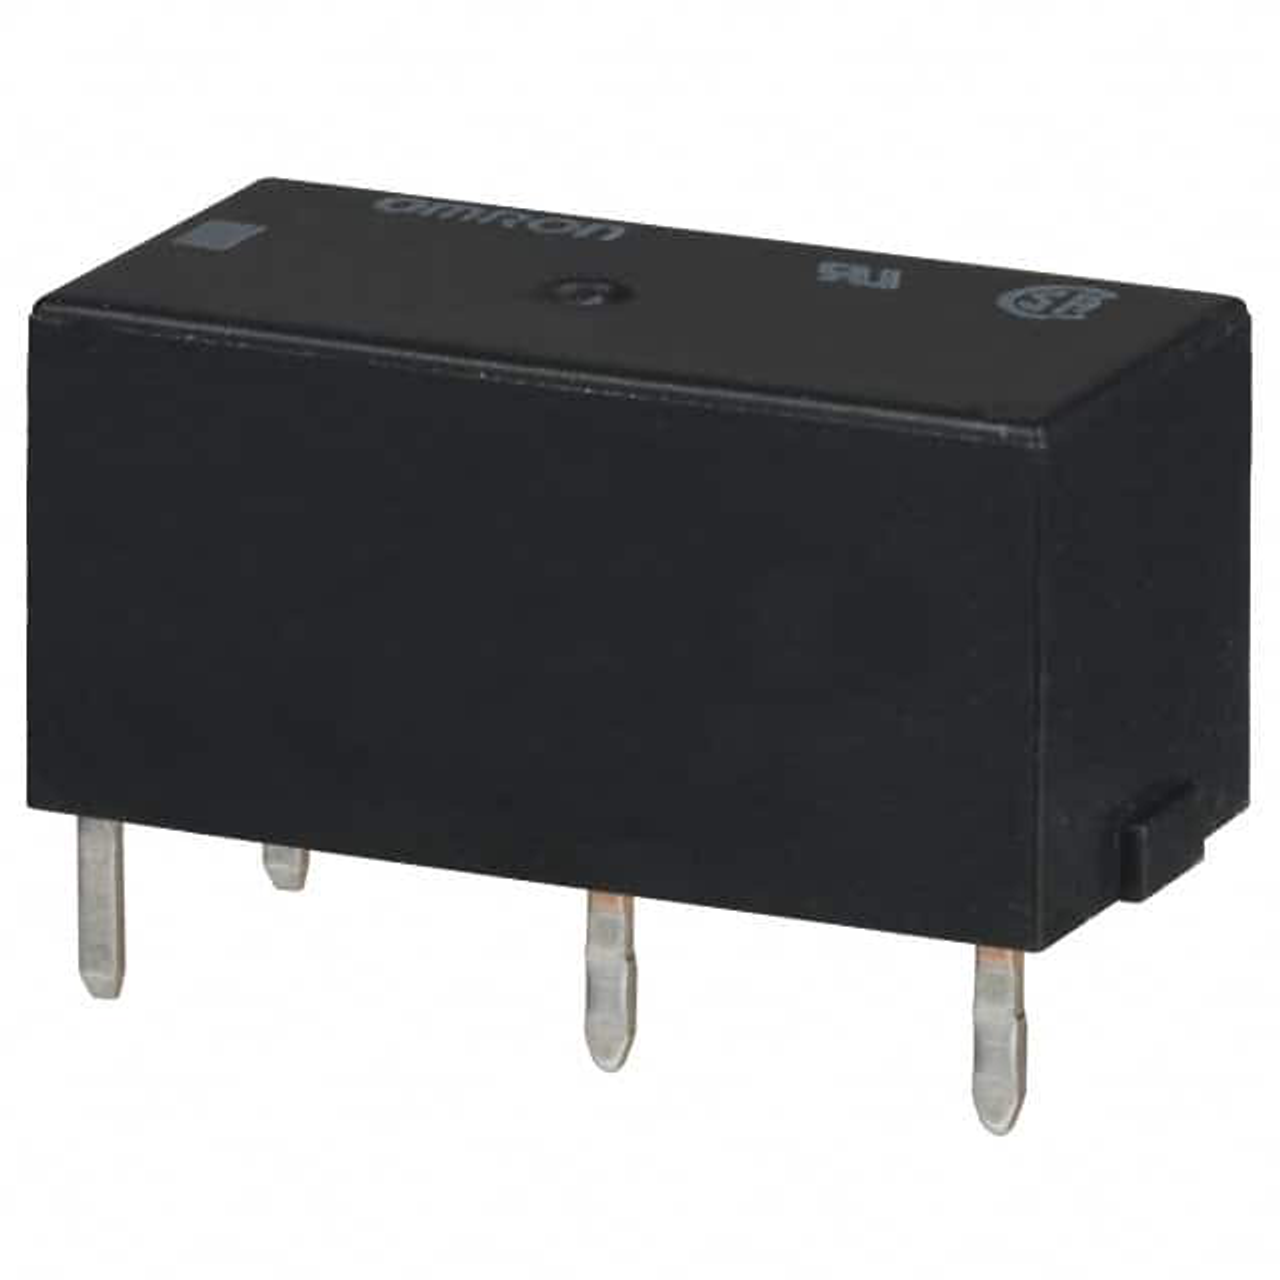 Omron G6B-1114P-FD-US-DC5 Power Relays